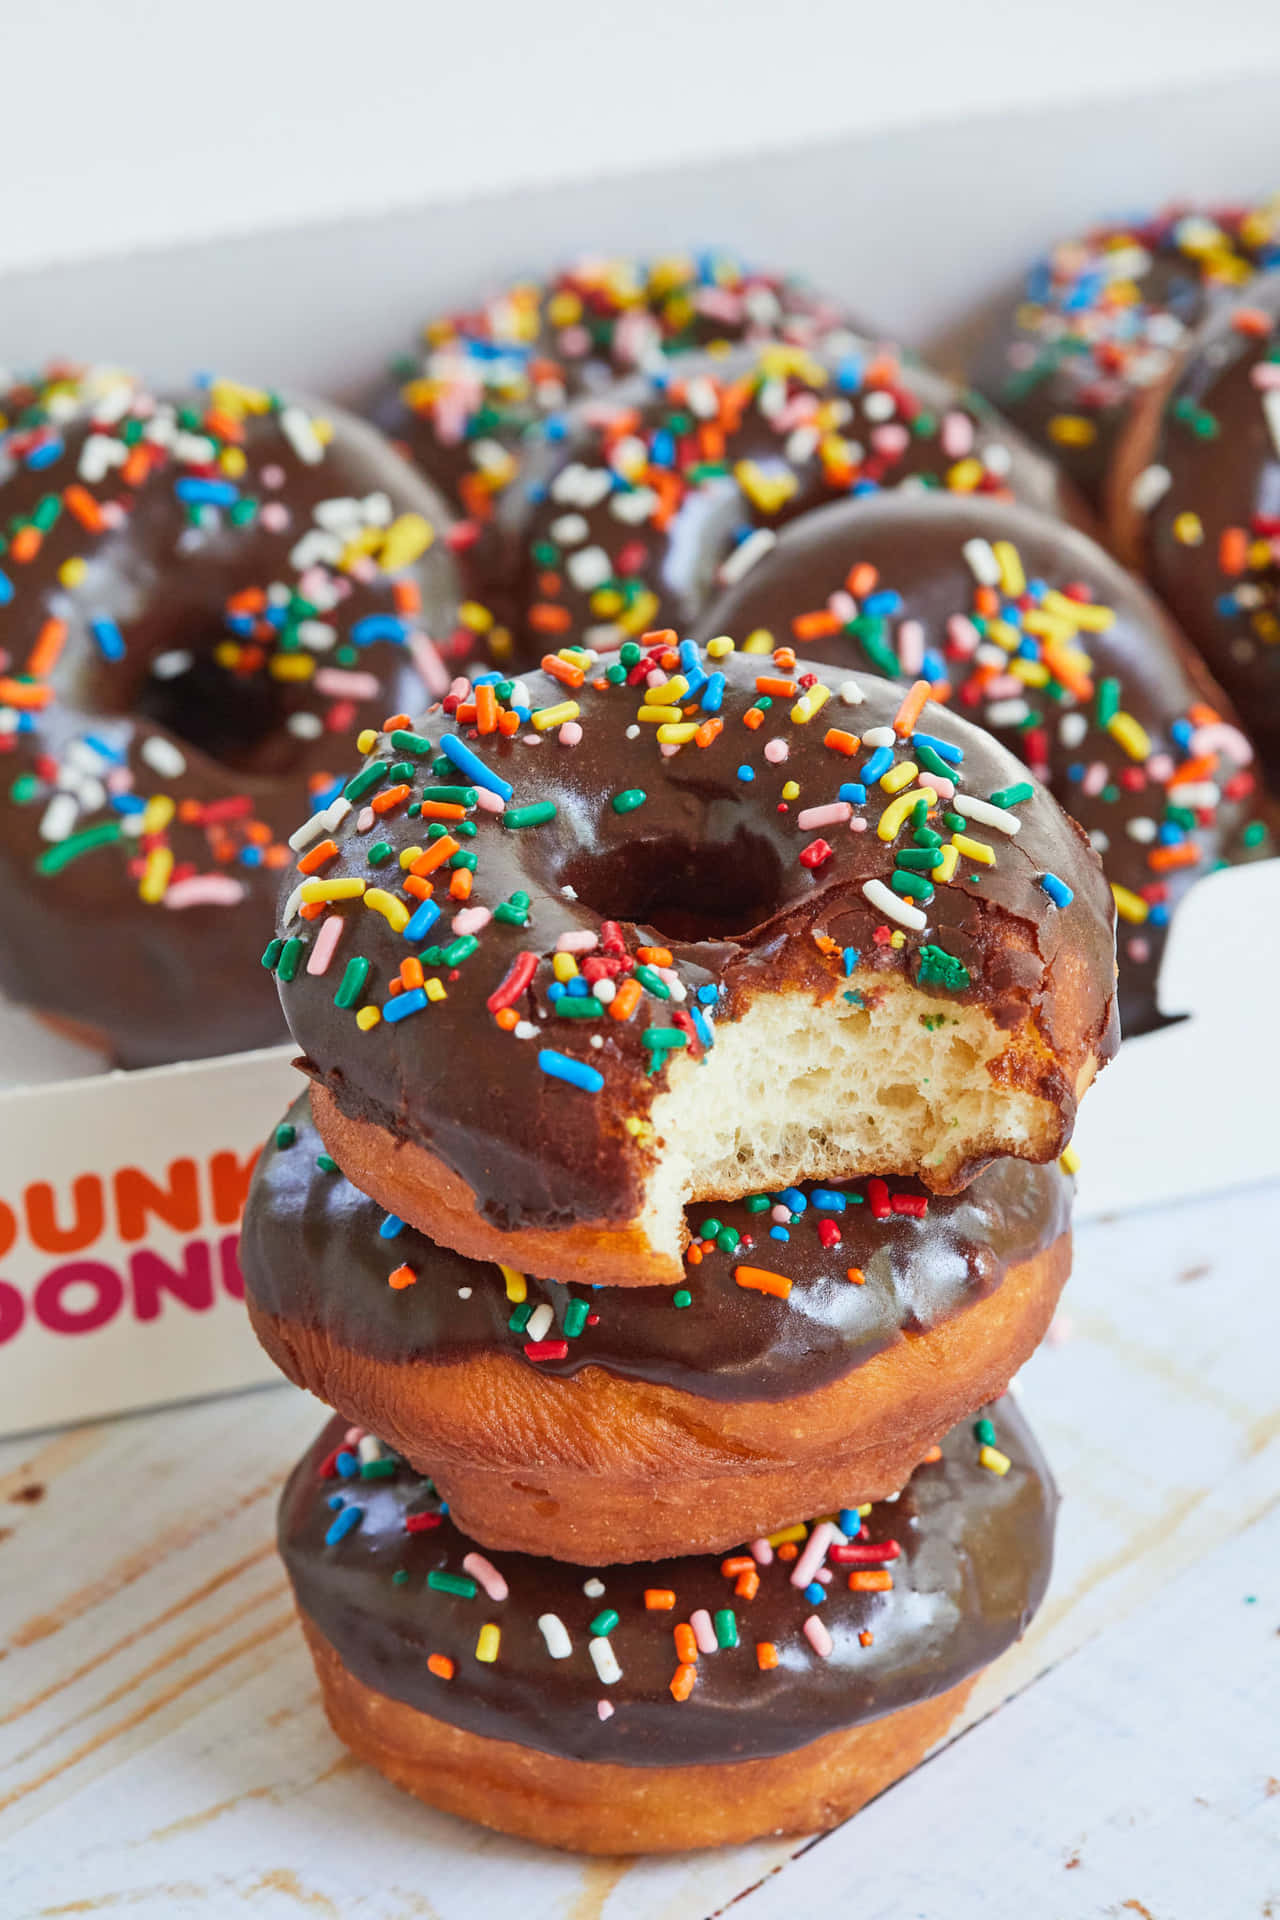 Enjoy A Sweet Treat From Dunkin Donuts Today